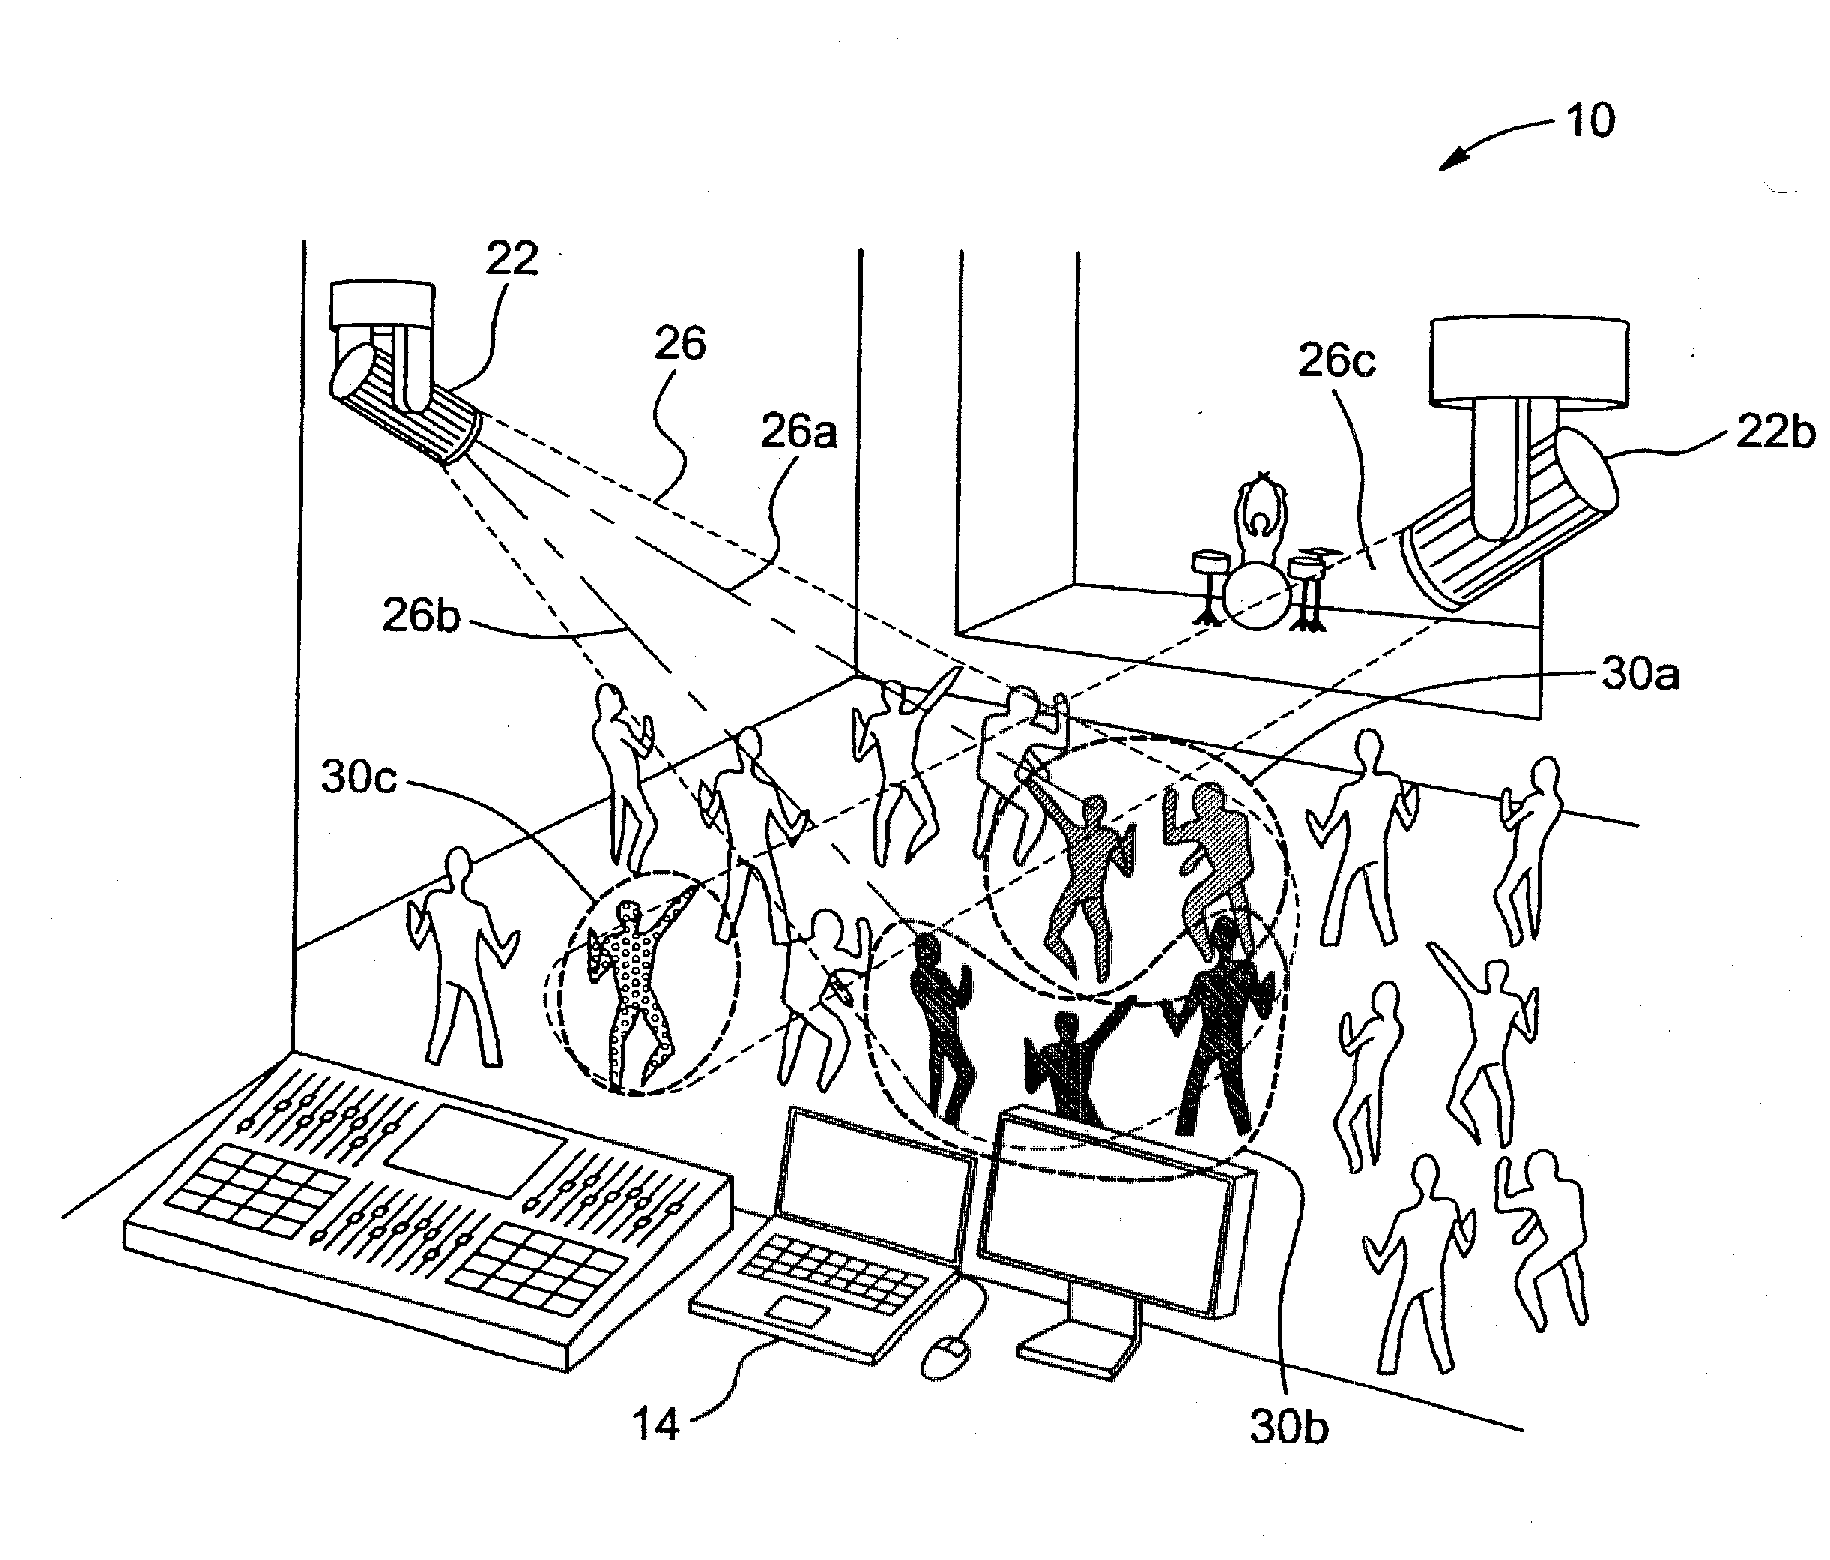 Devices and methods for providing a distributed manifestation in an environment